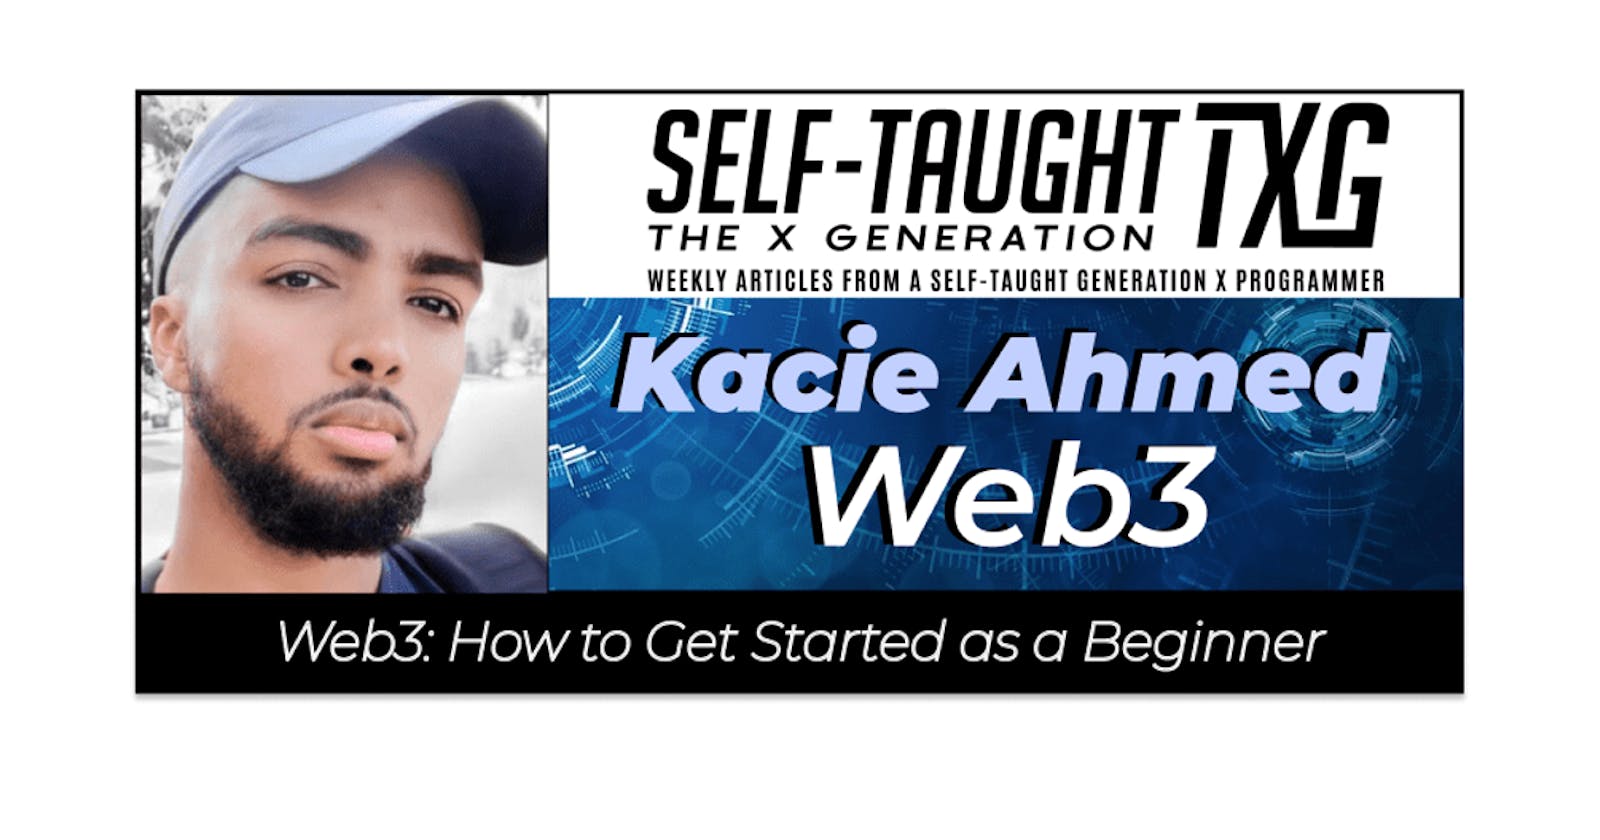 Kacie Ahmed: Web3 - How to Get Started as a Beginner